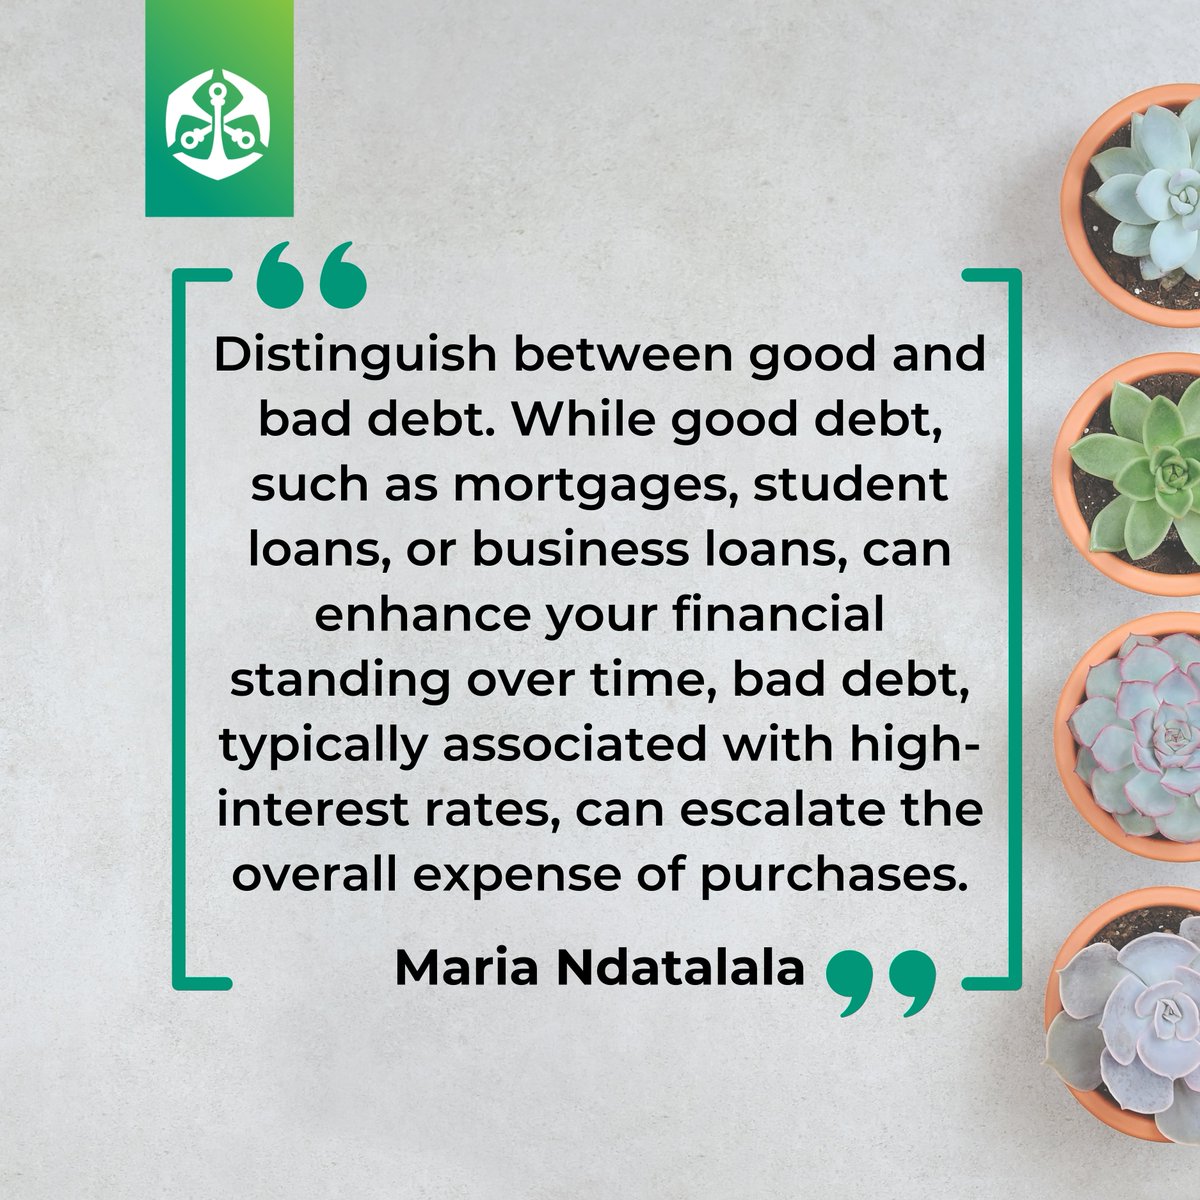 Wednesday Financial Insight: Maria Ndatalala shares wisdom on distinguishing good from bad debt. Make informed financial decisions with Old Mutual Namibia. 

#FinancialInsight #OldMutualNamibia